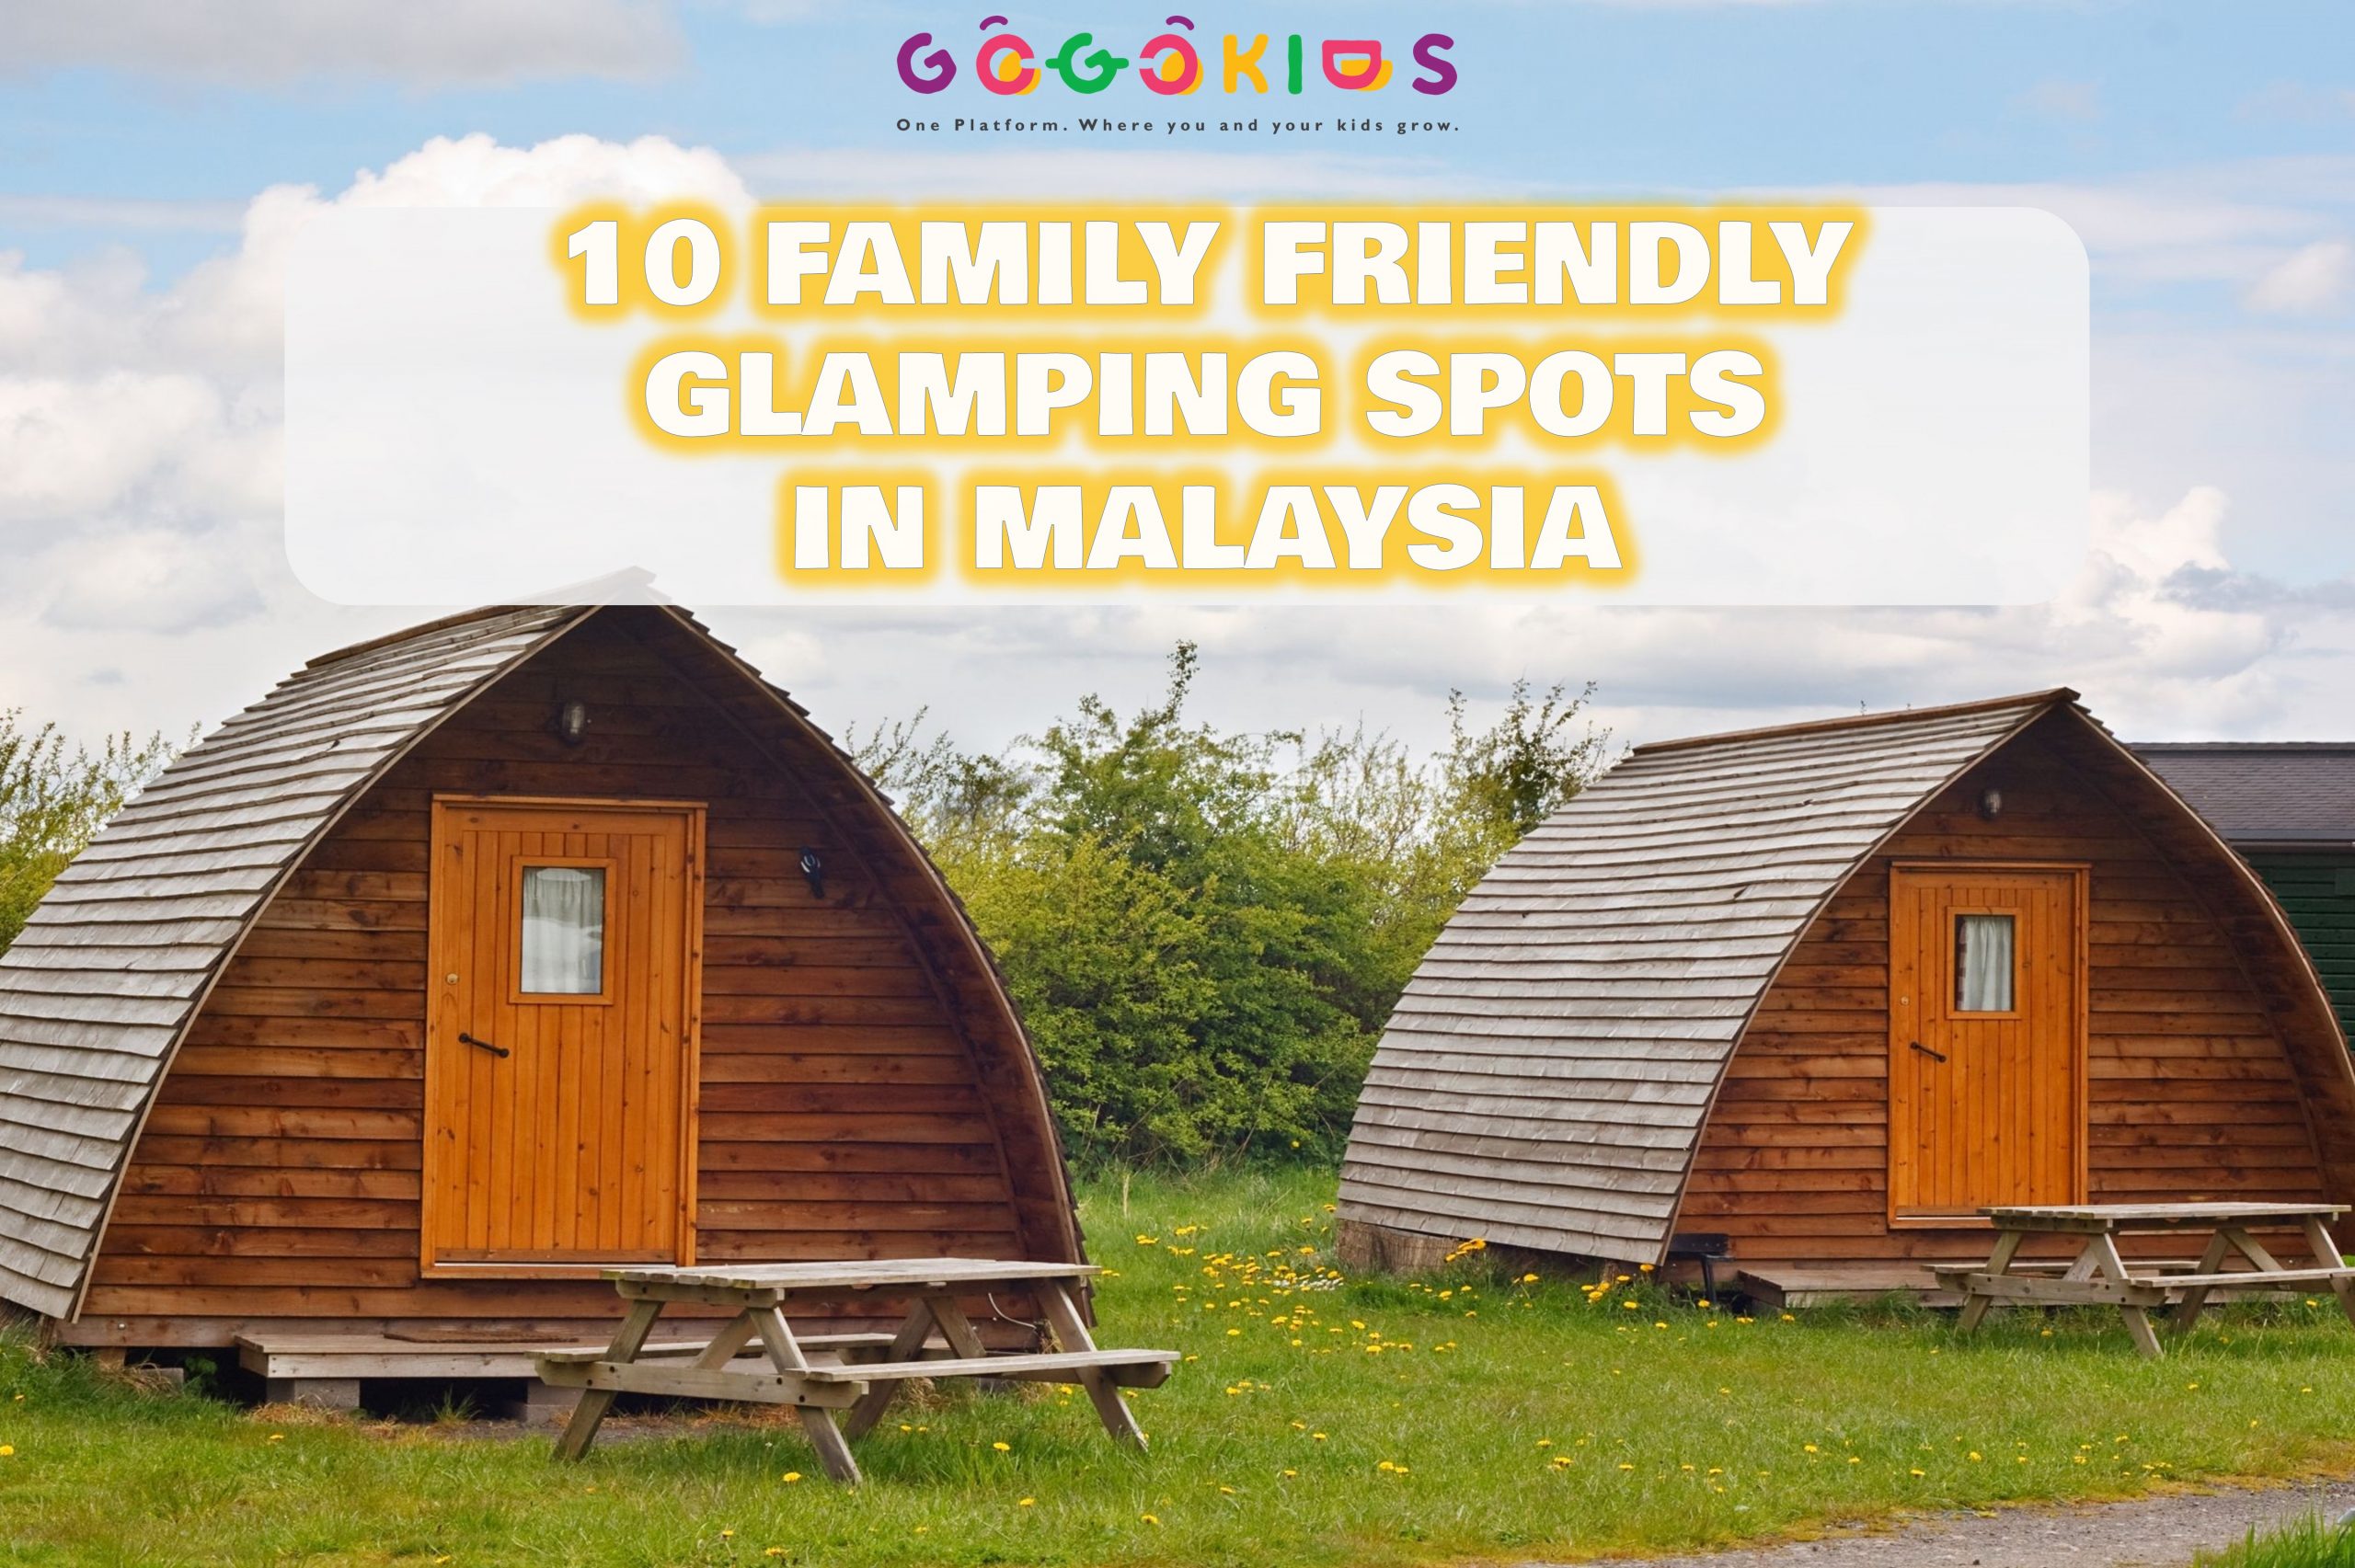 10 Family Friendly Glamping Spots in Malaysia